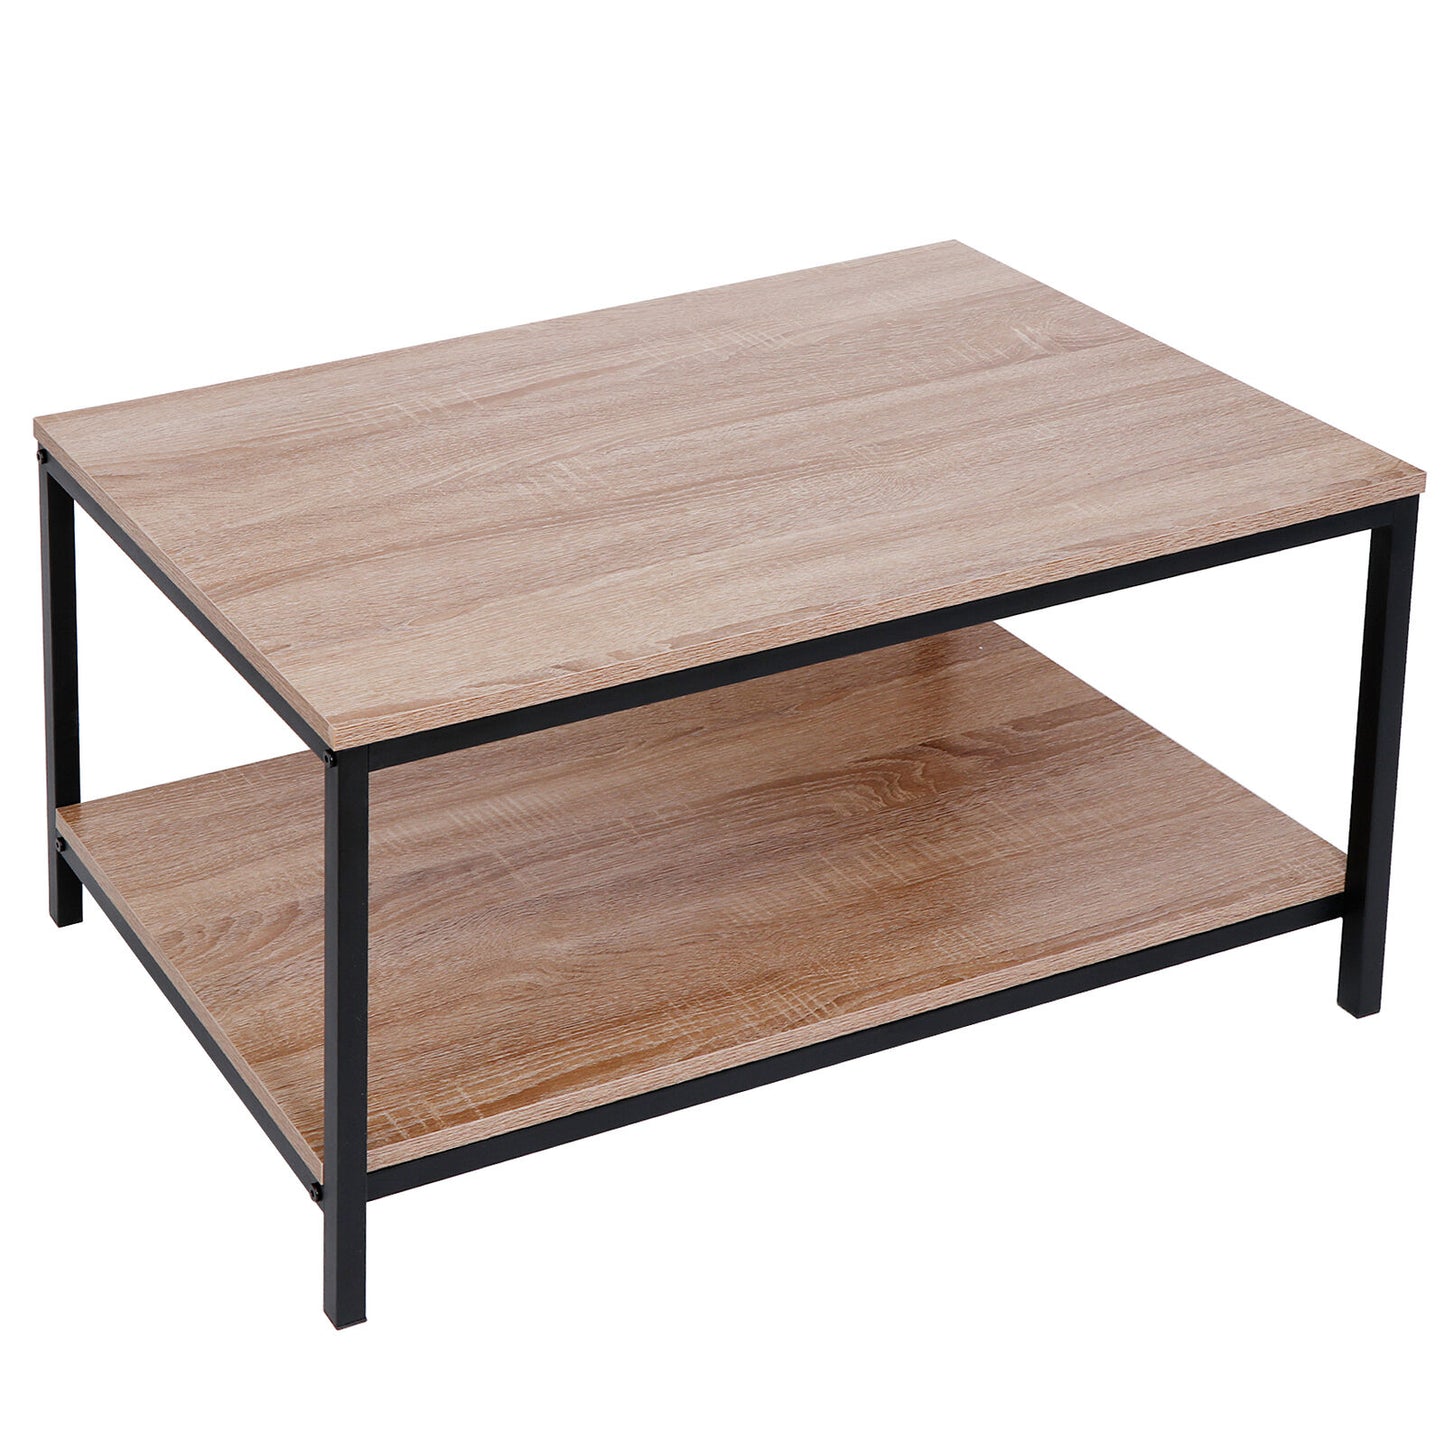 Coffee Table Industrial Cocktail Table with Storage Shelf Livingroom Natural